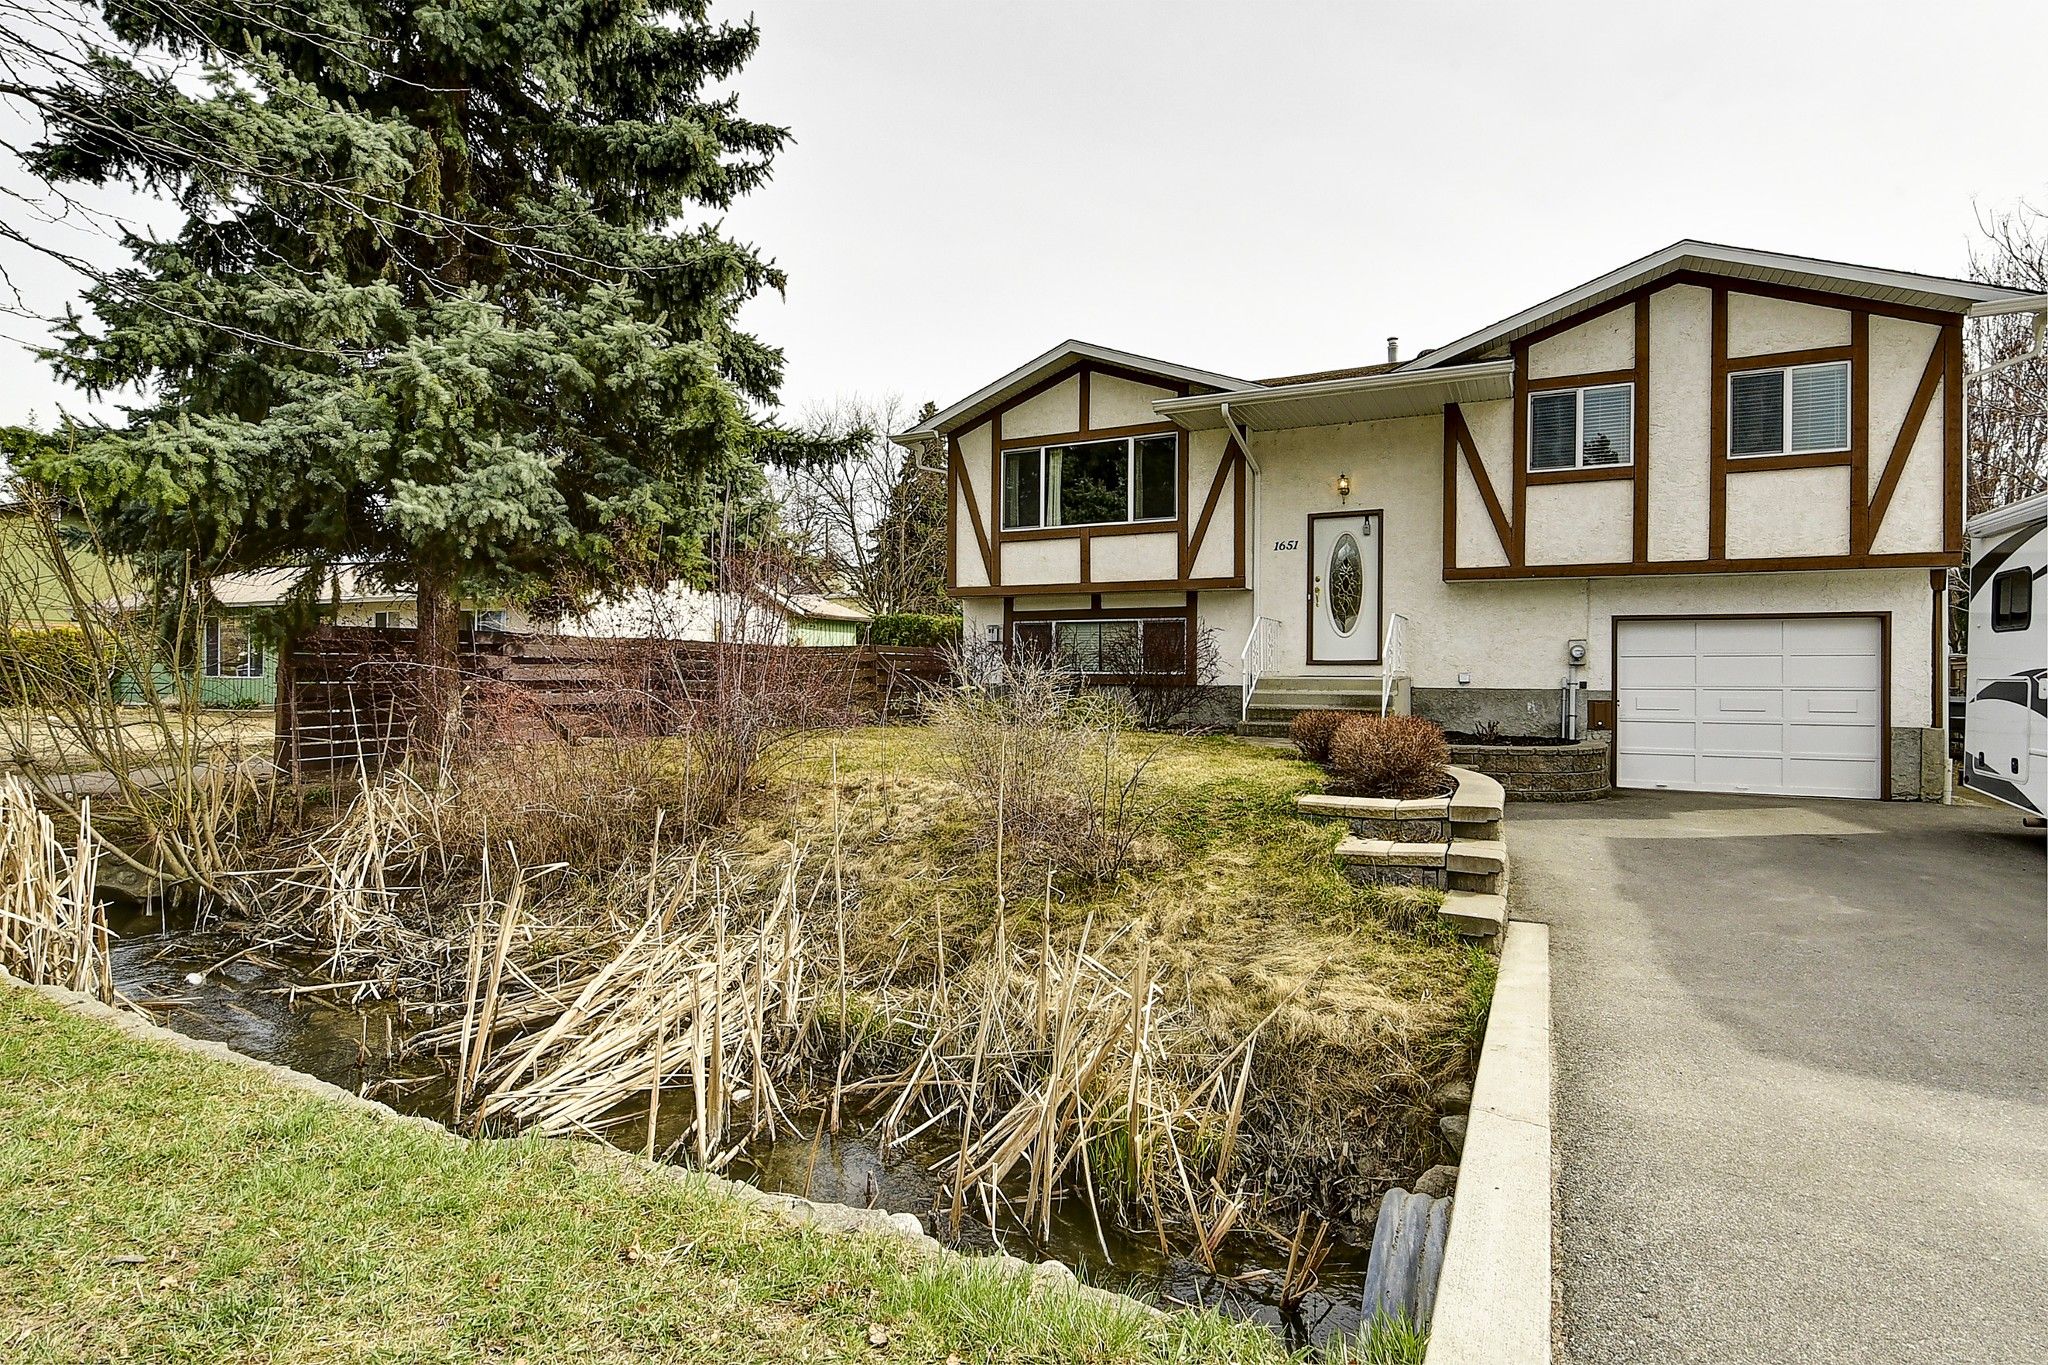 Main Photo: 1651 Blondeaux Crescent in Kelowna: Glenmore House for sale (Central Okanagan)  : MLS®# 10202415